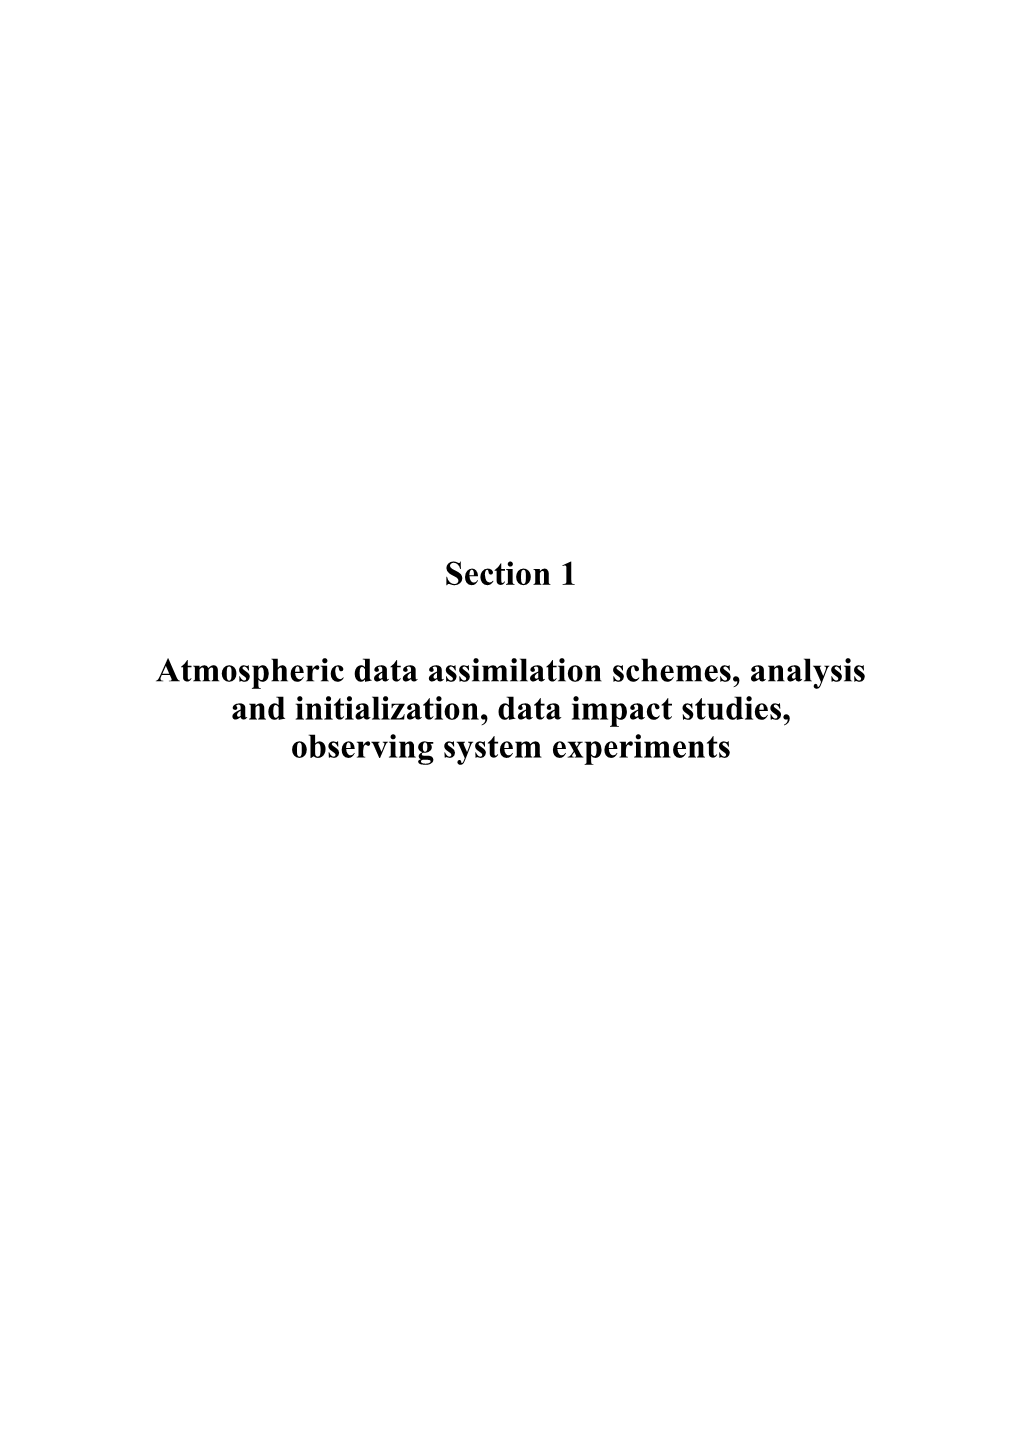 Section 1 Atmospheric Data Assimilation Schemes, Analysis And